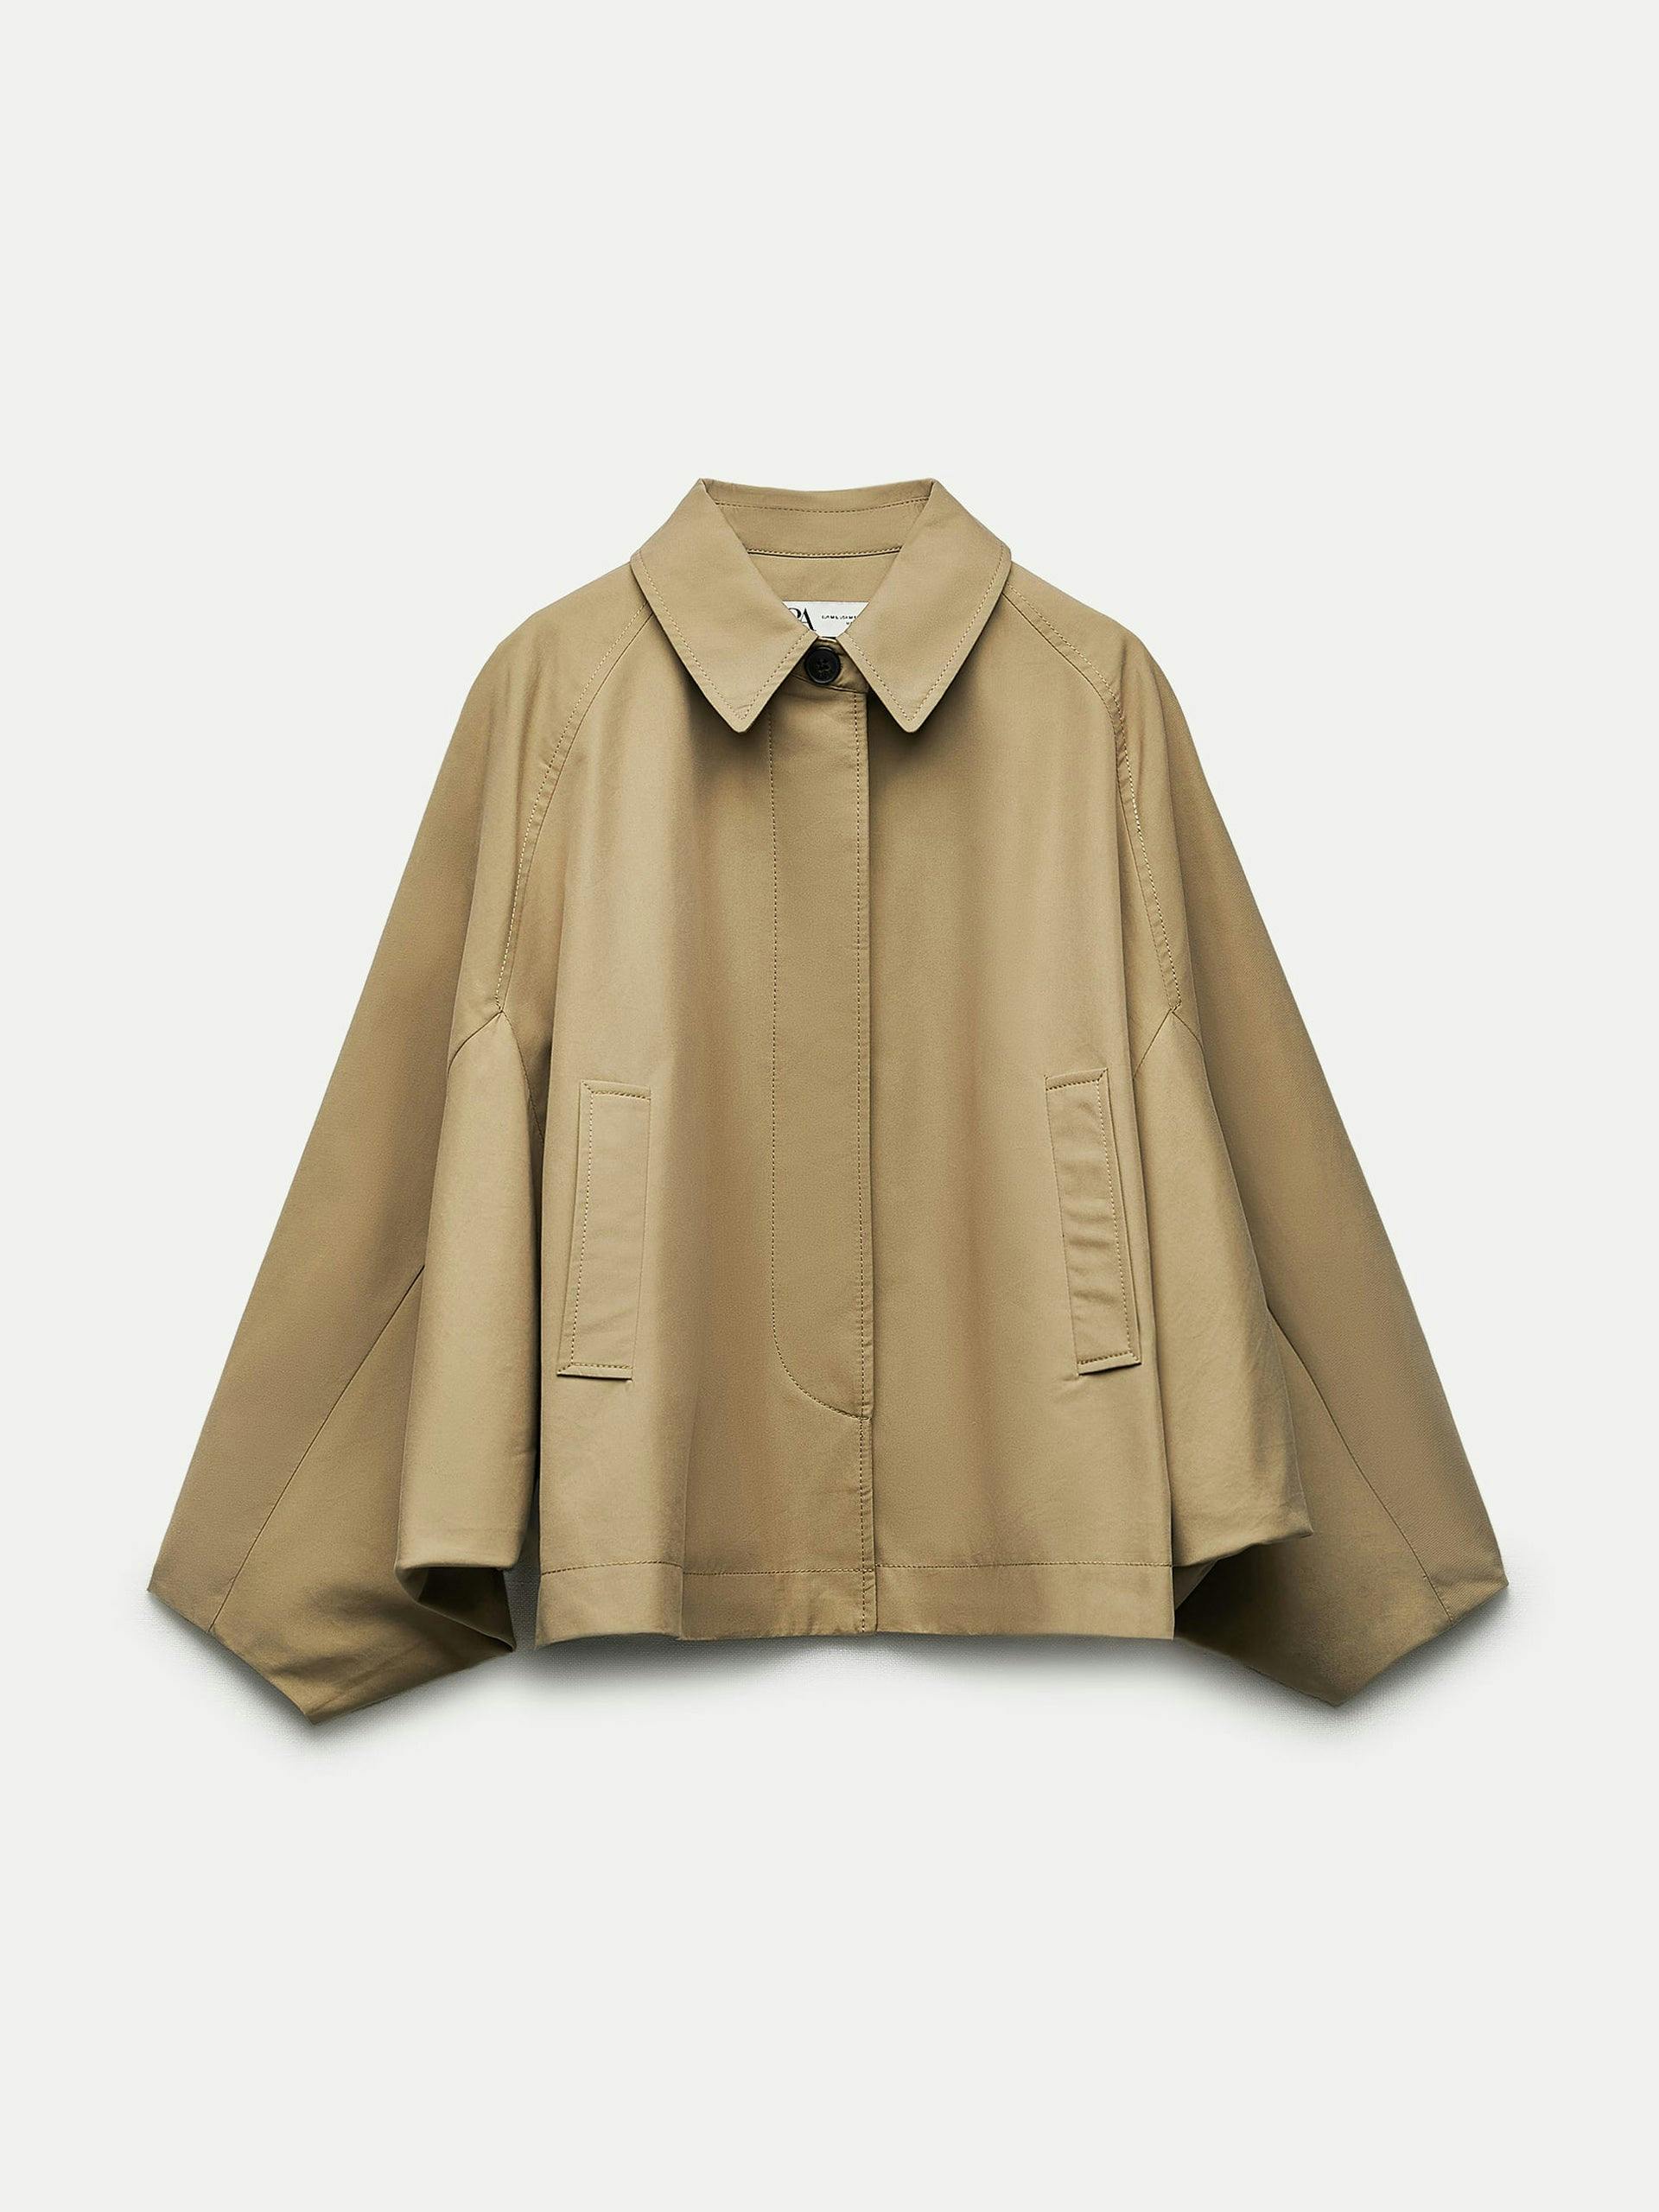 ZZ collection cape trench coat